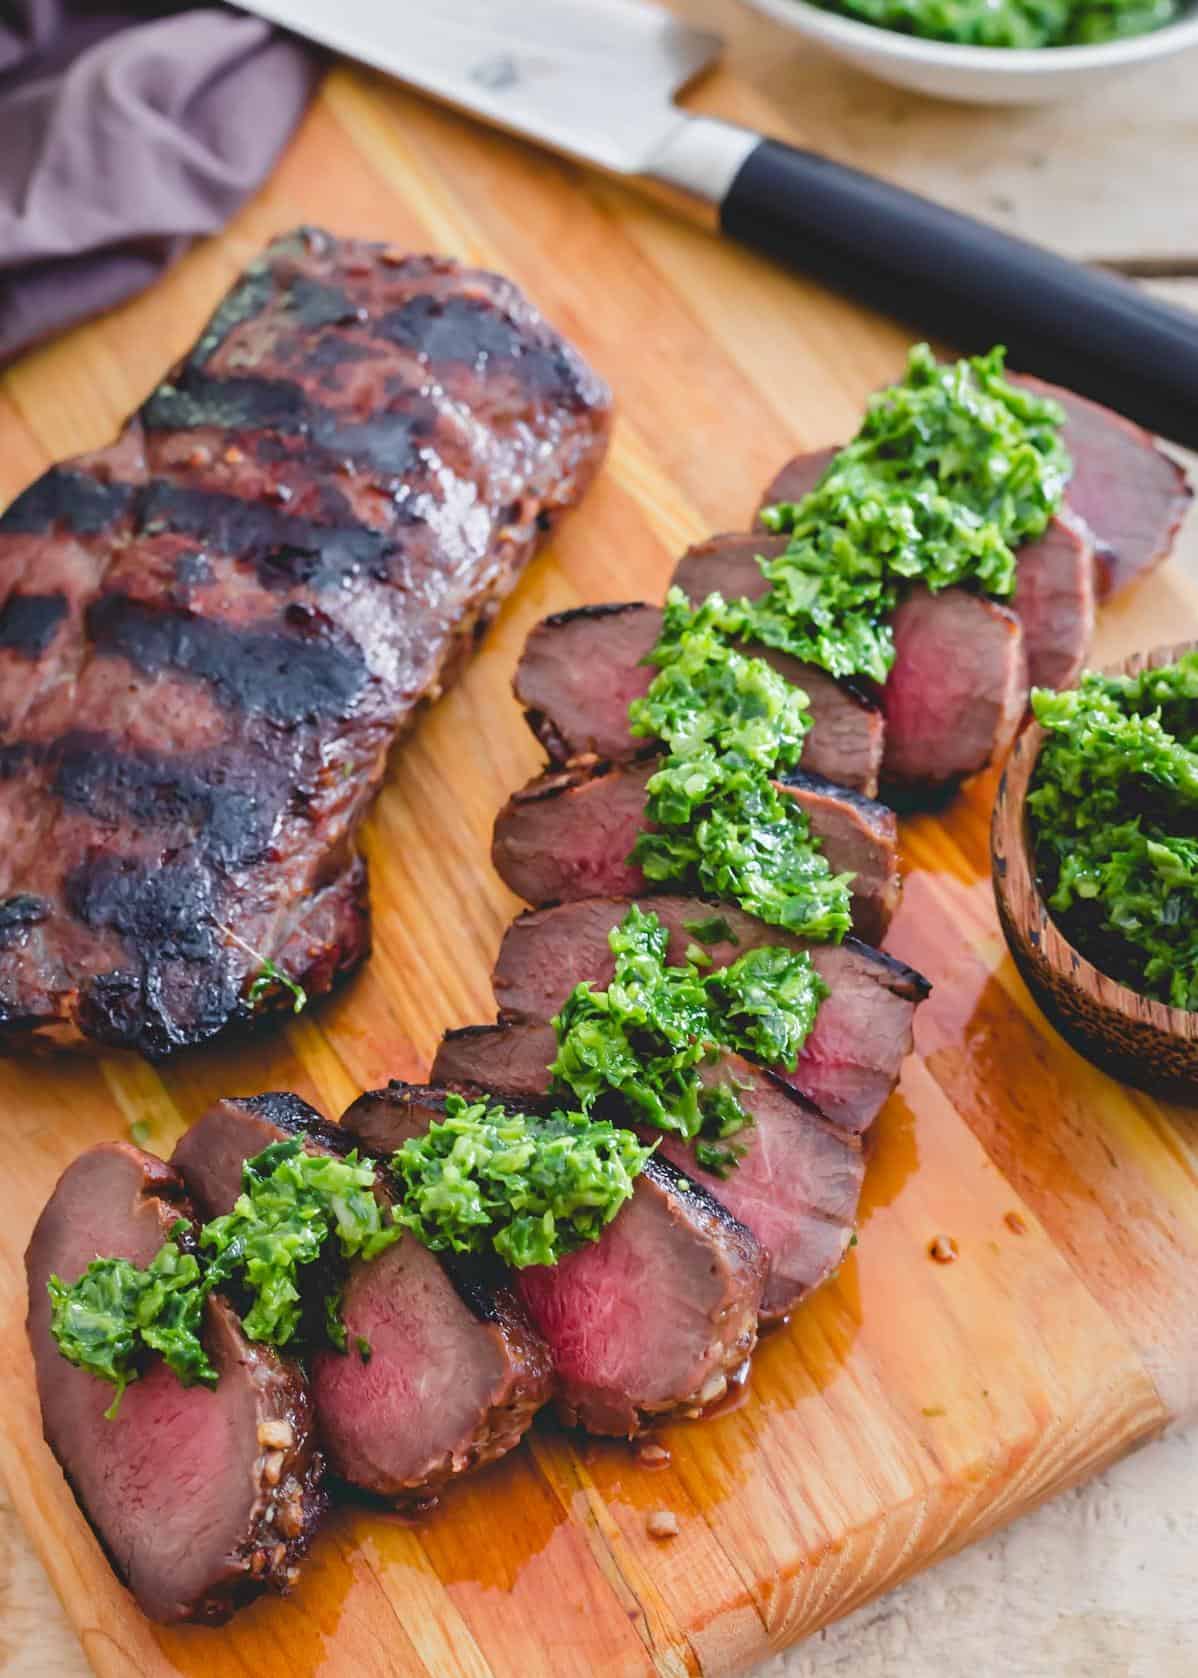  The star of the BBQ show – grilled venison tenderloin!